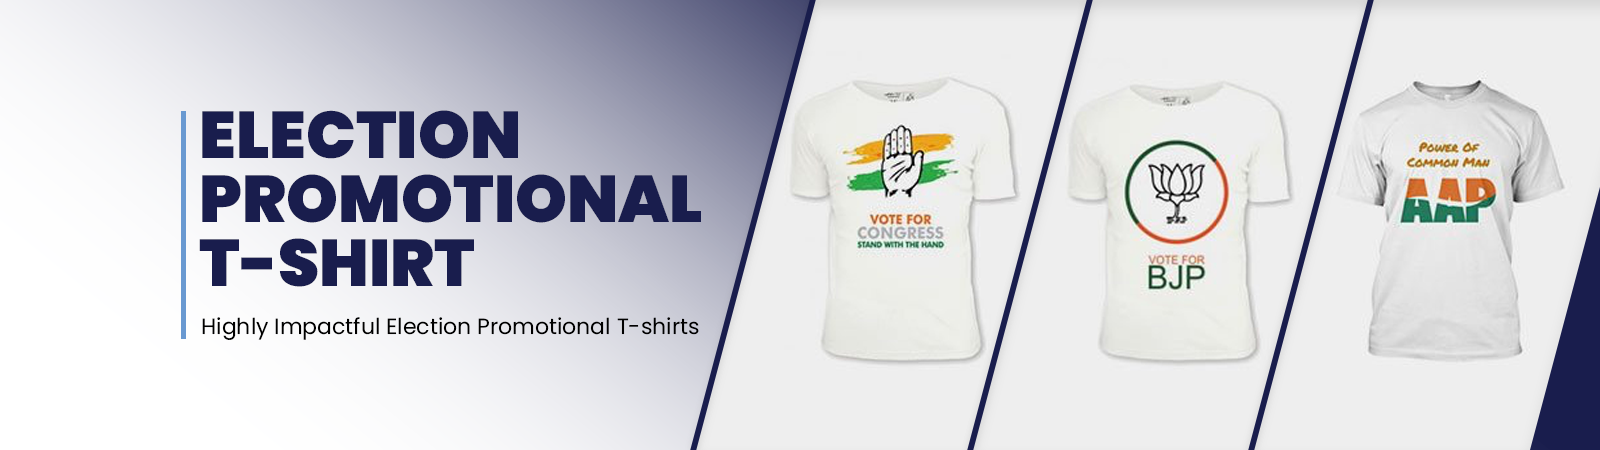 Election Promotional T-Shirt